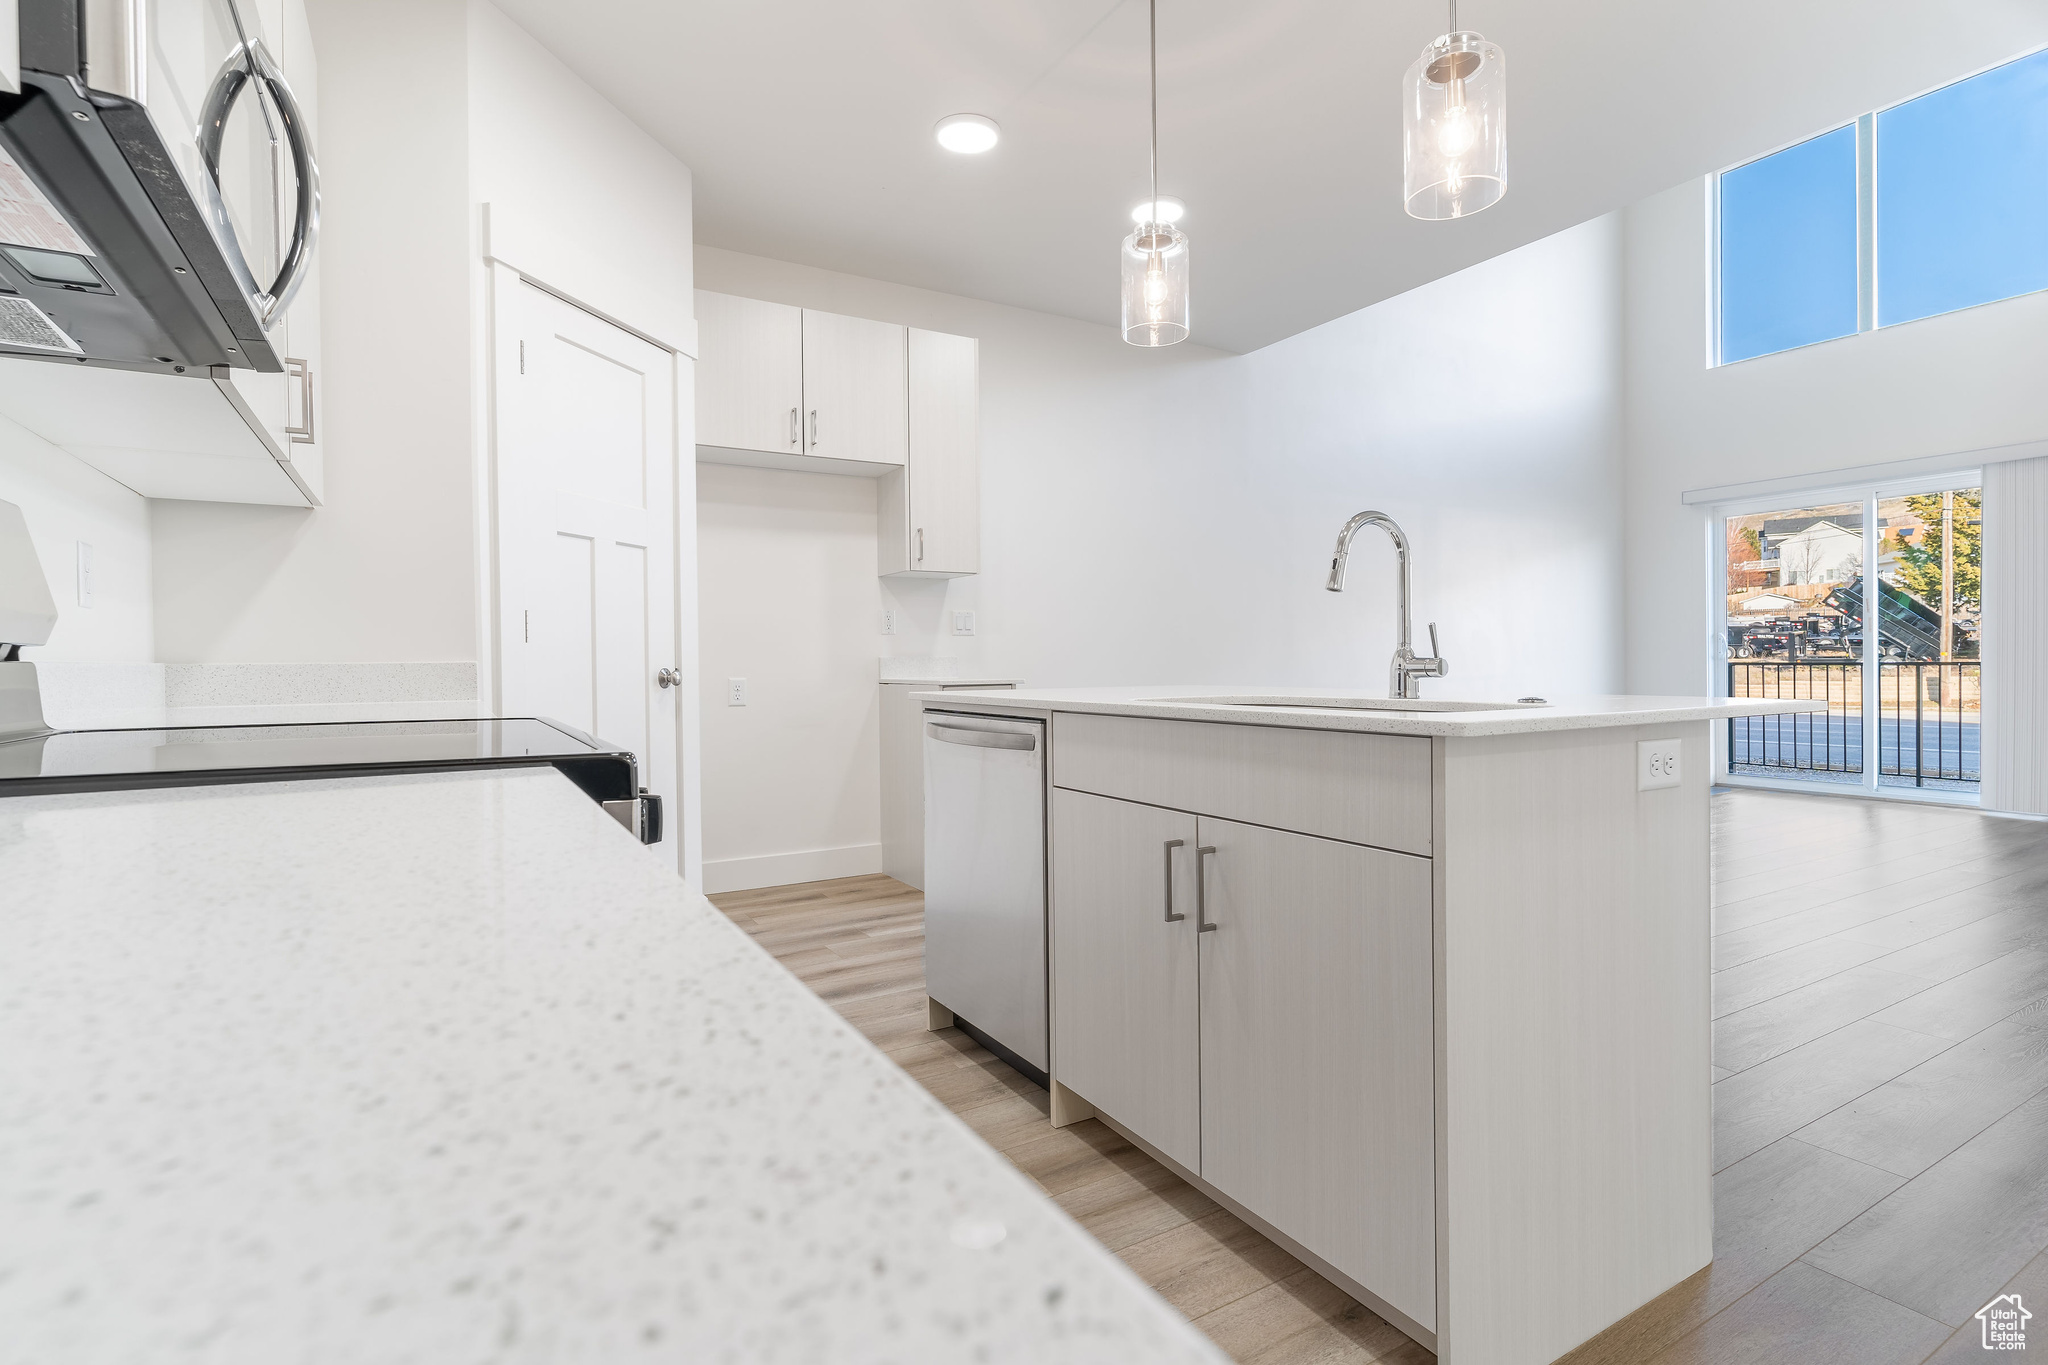 Kitchen featuring sink, a kitchen island with sink, appliances with stainless steel finishes, light hardwood / wood-style floors, and pendant lighting